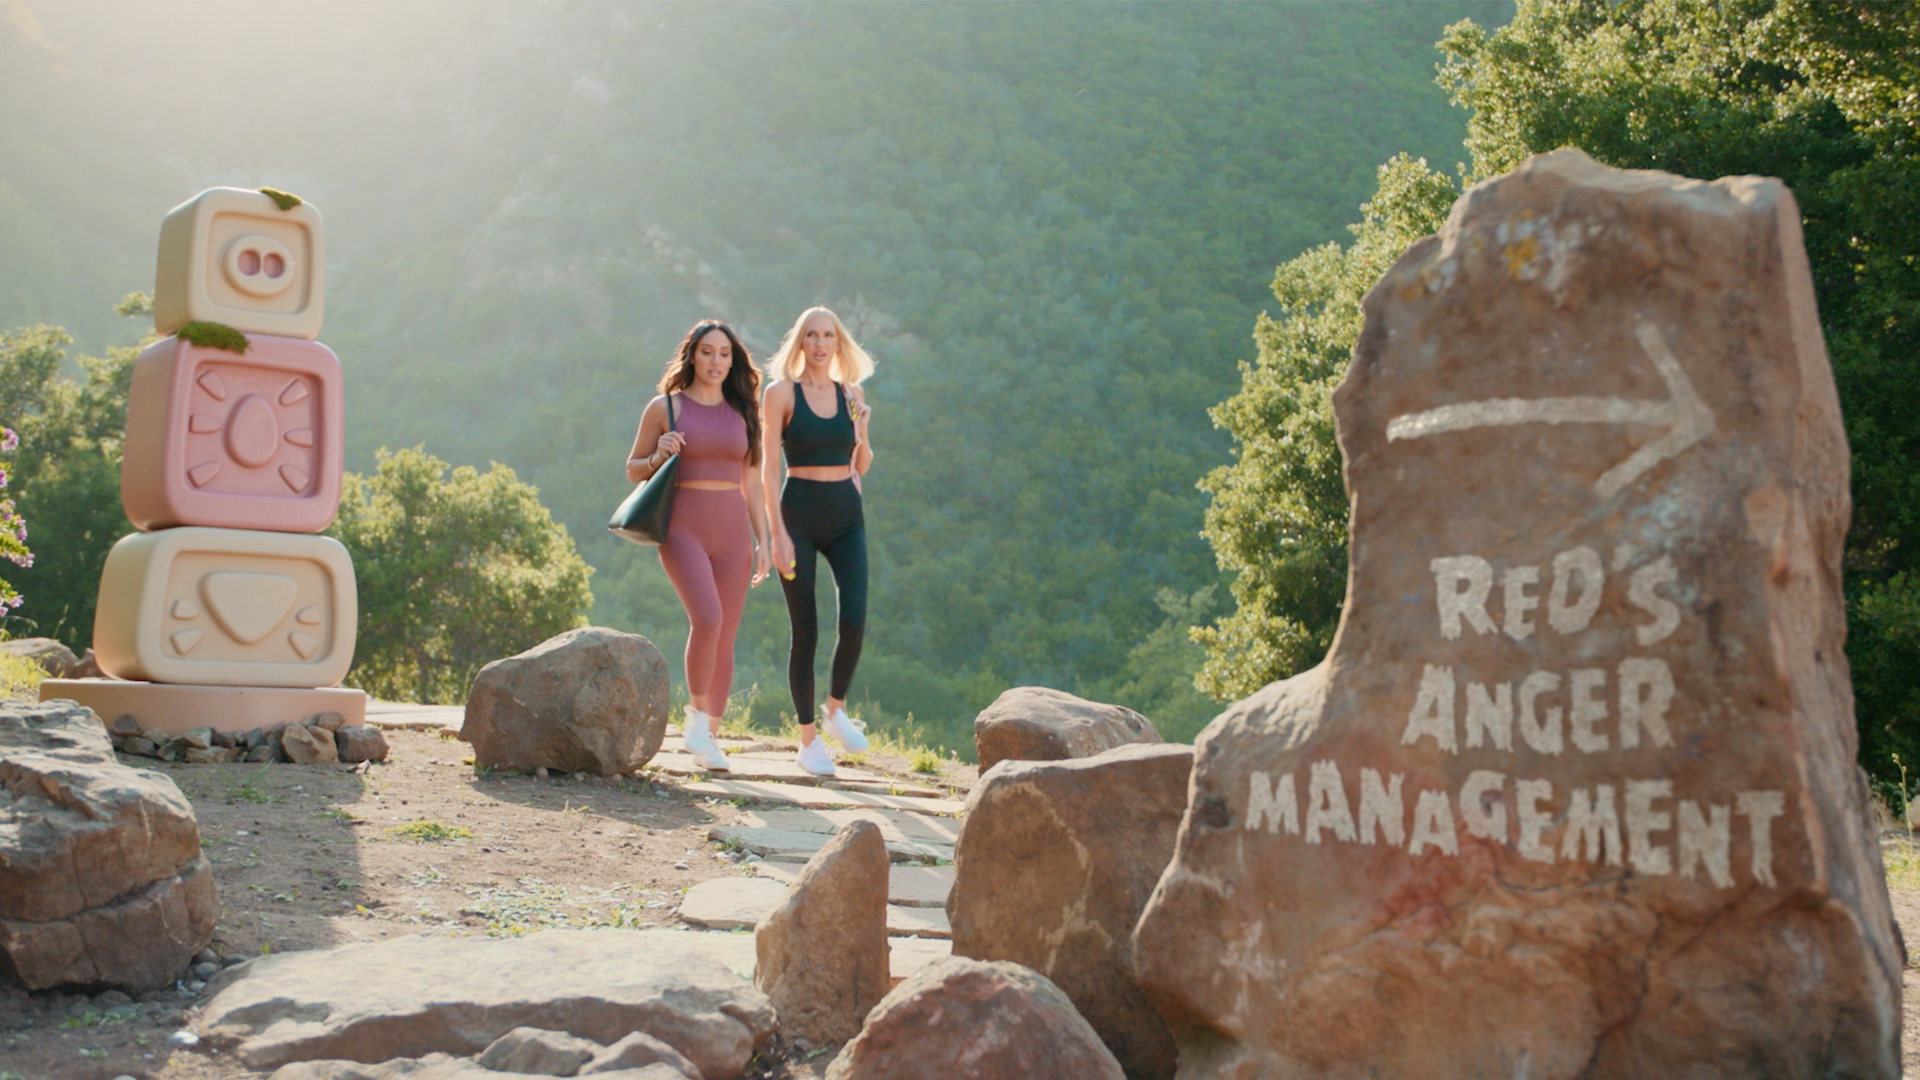 Melissa Gorga and Christine Quinn walking up an outside trail with a sign painted in white on a rock stating Red’s Anger Management with a white arrow.